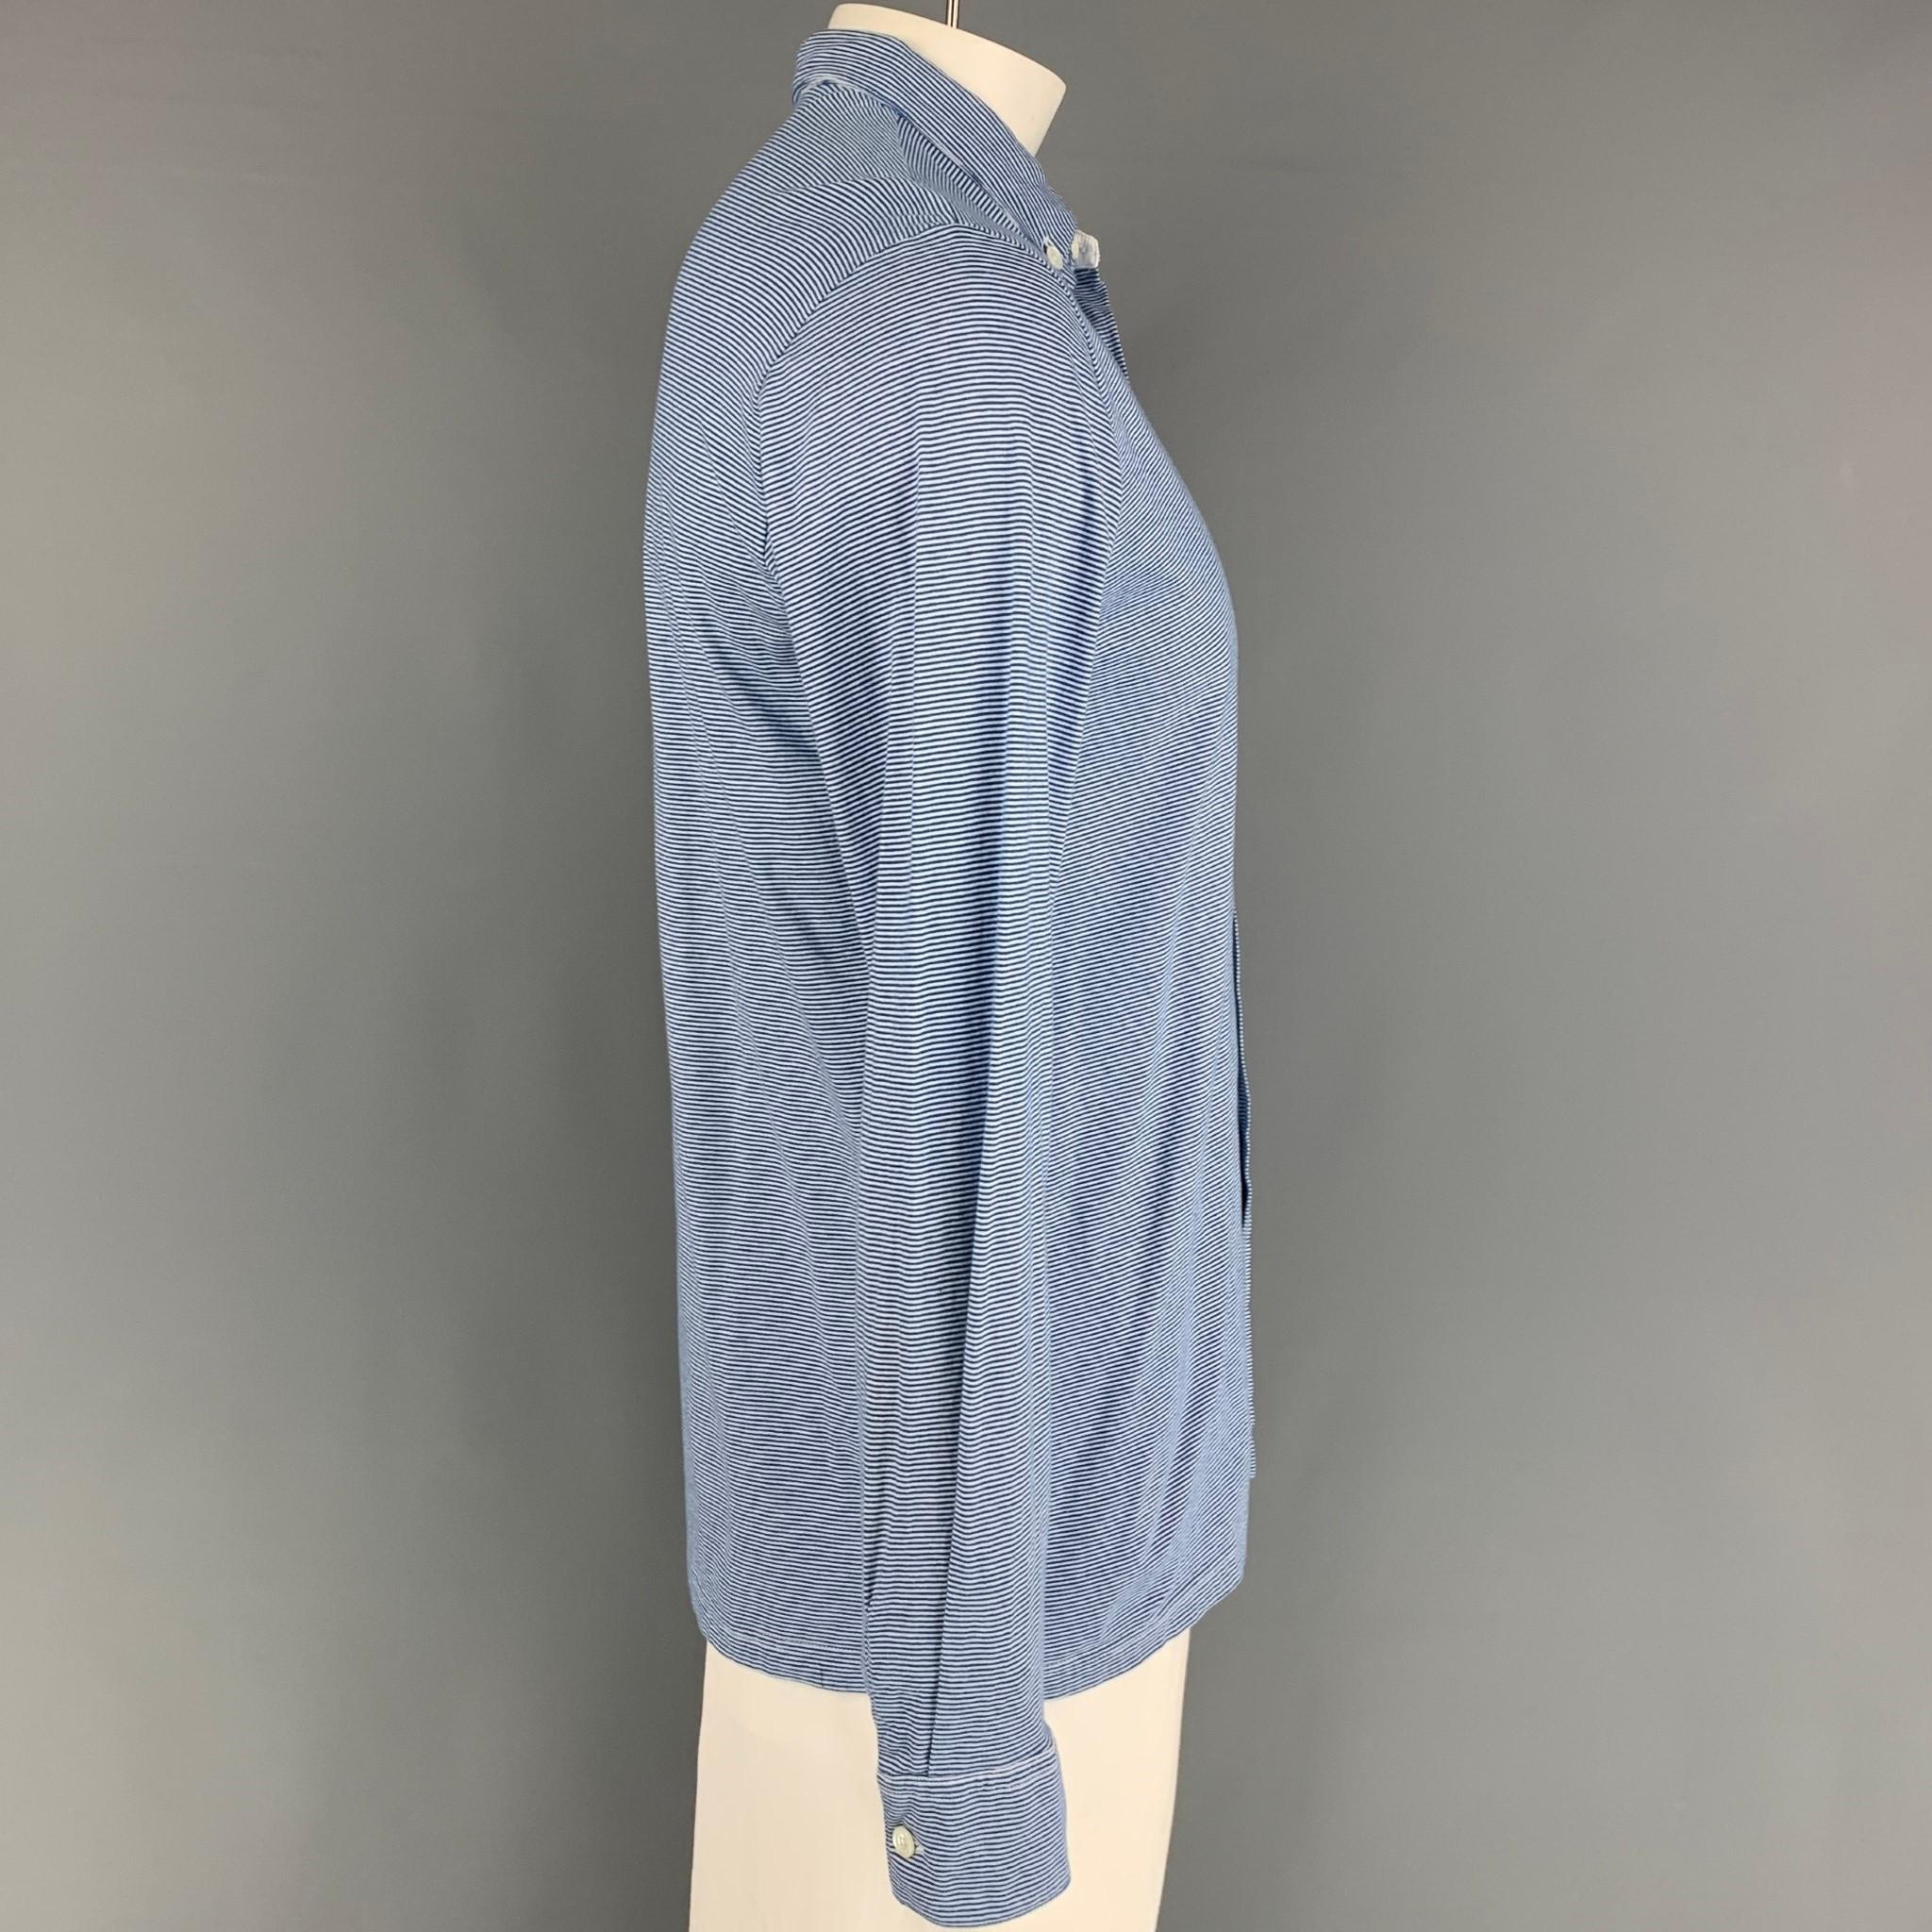 AGNES B. long sleeve shirt comes in a blue & white stripe cotton featuring a button down collar and a button up closure. 

Very Good Pre-Owned Condition.
Marked: 3

Measurements:

Shoulder: 18.5 in.
Chest: 40 in.
Sleeve: 27 in.
Length: 28.5 in. 